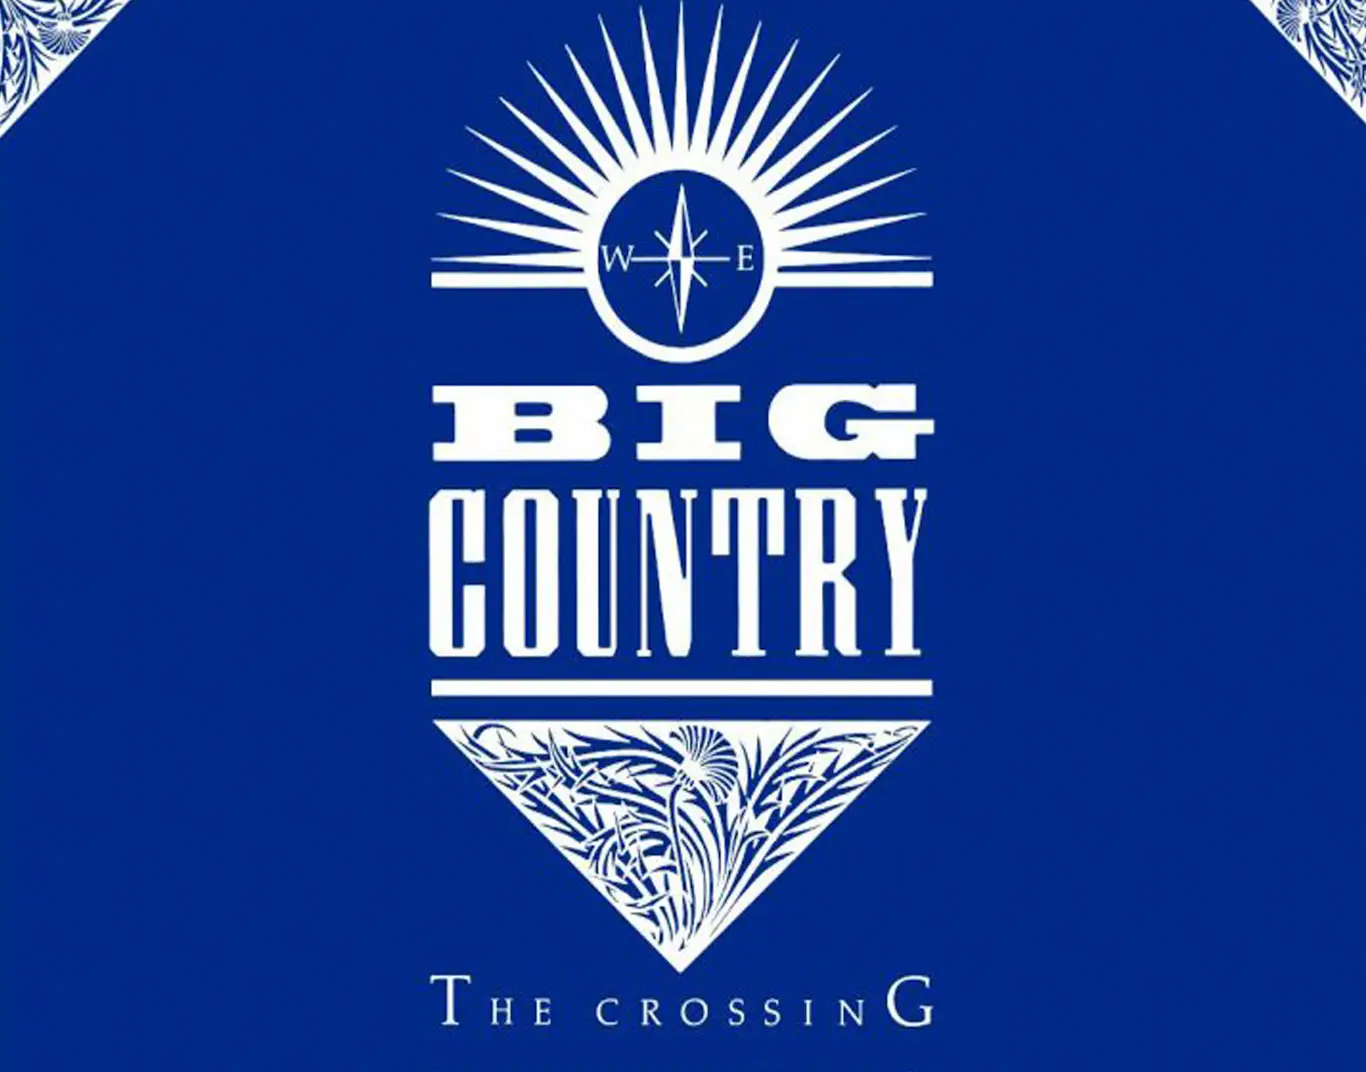 BIG COUNTRY return to Belfast for the 40th anniversary of ‘The Crossing’ album